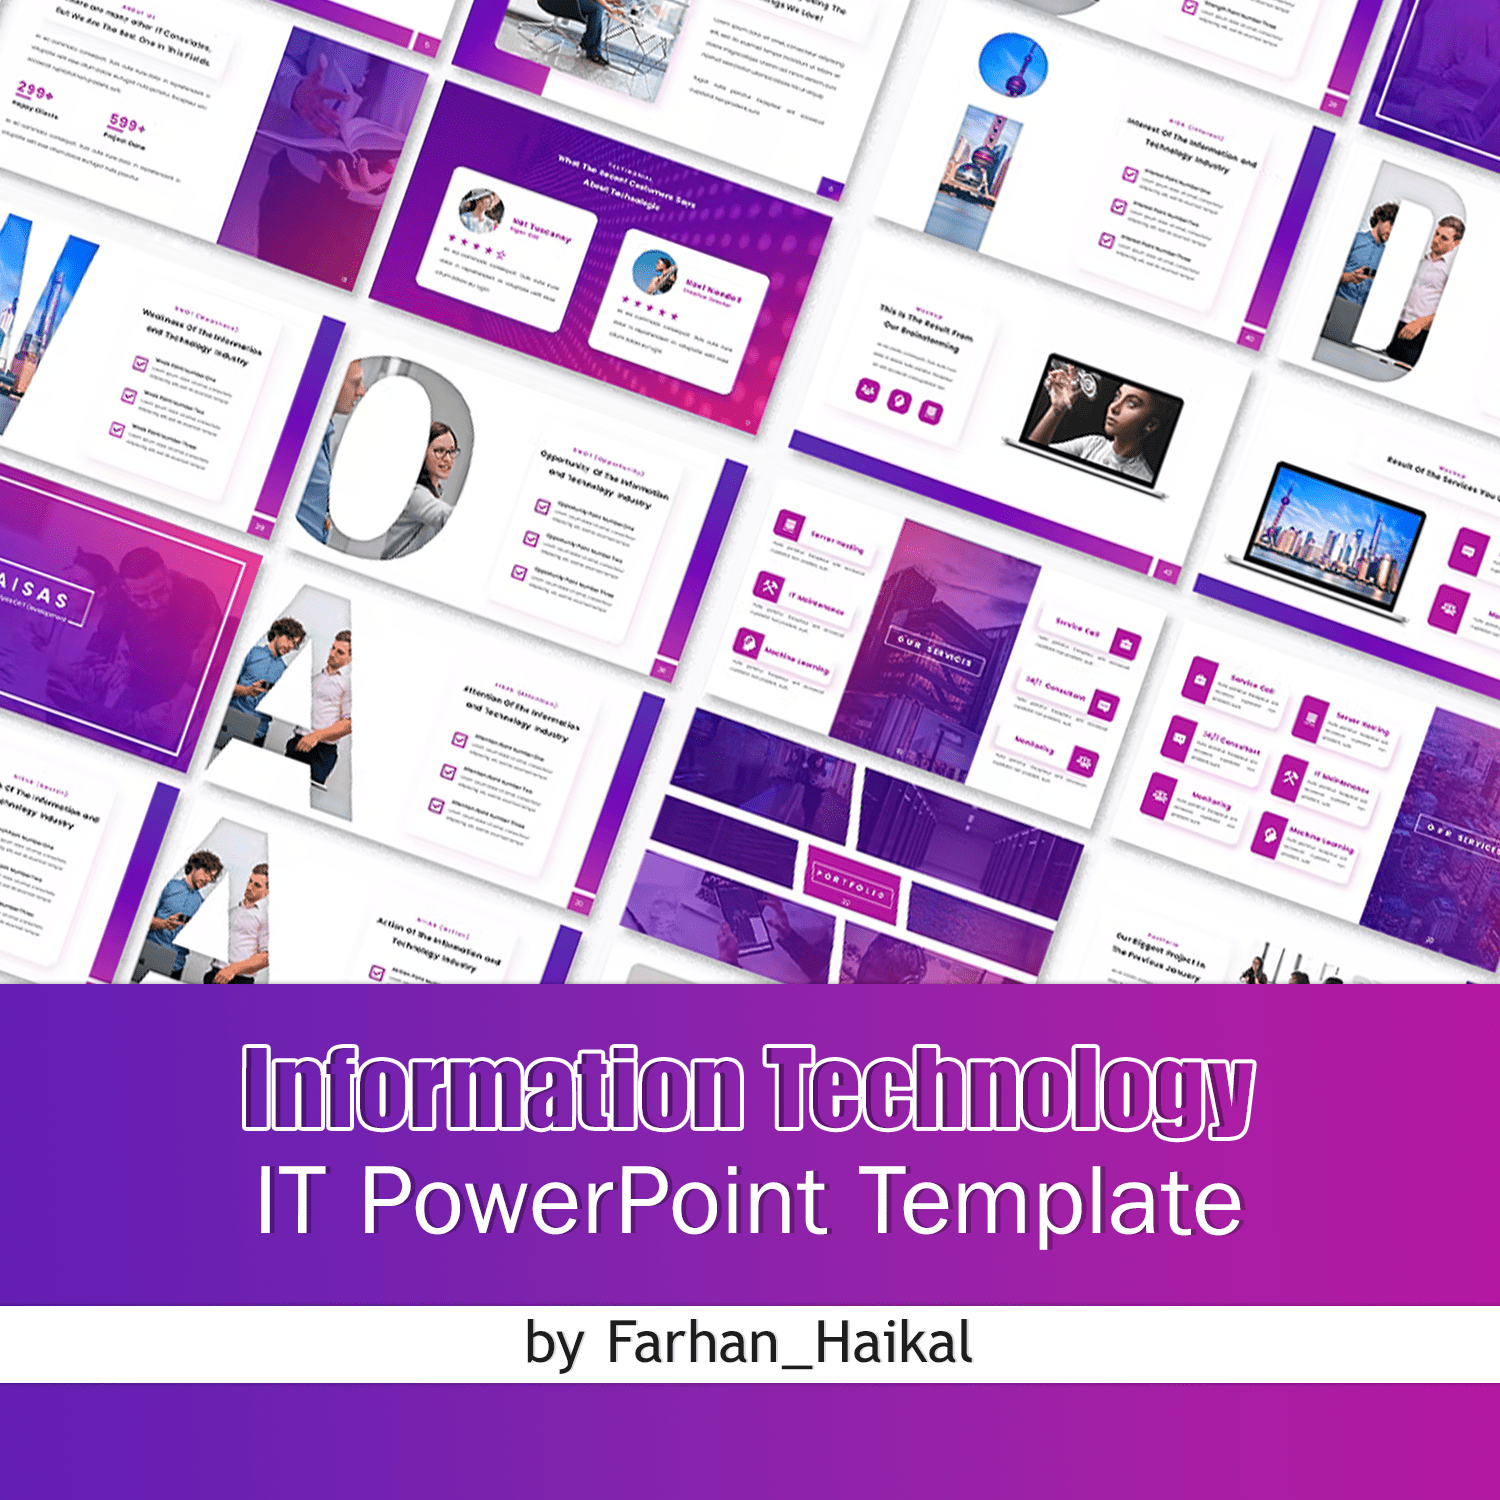 Information Technology - IT PowerPoint Template Cover.